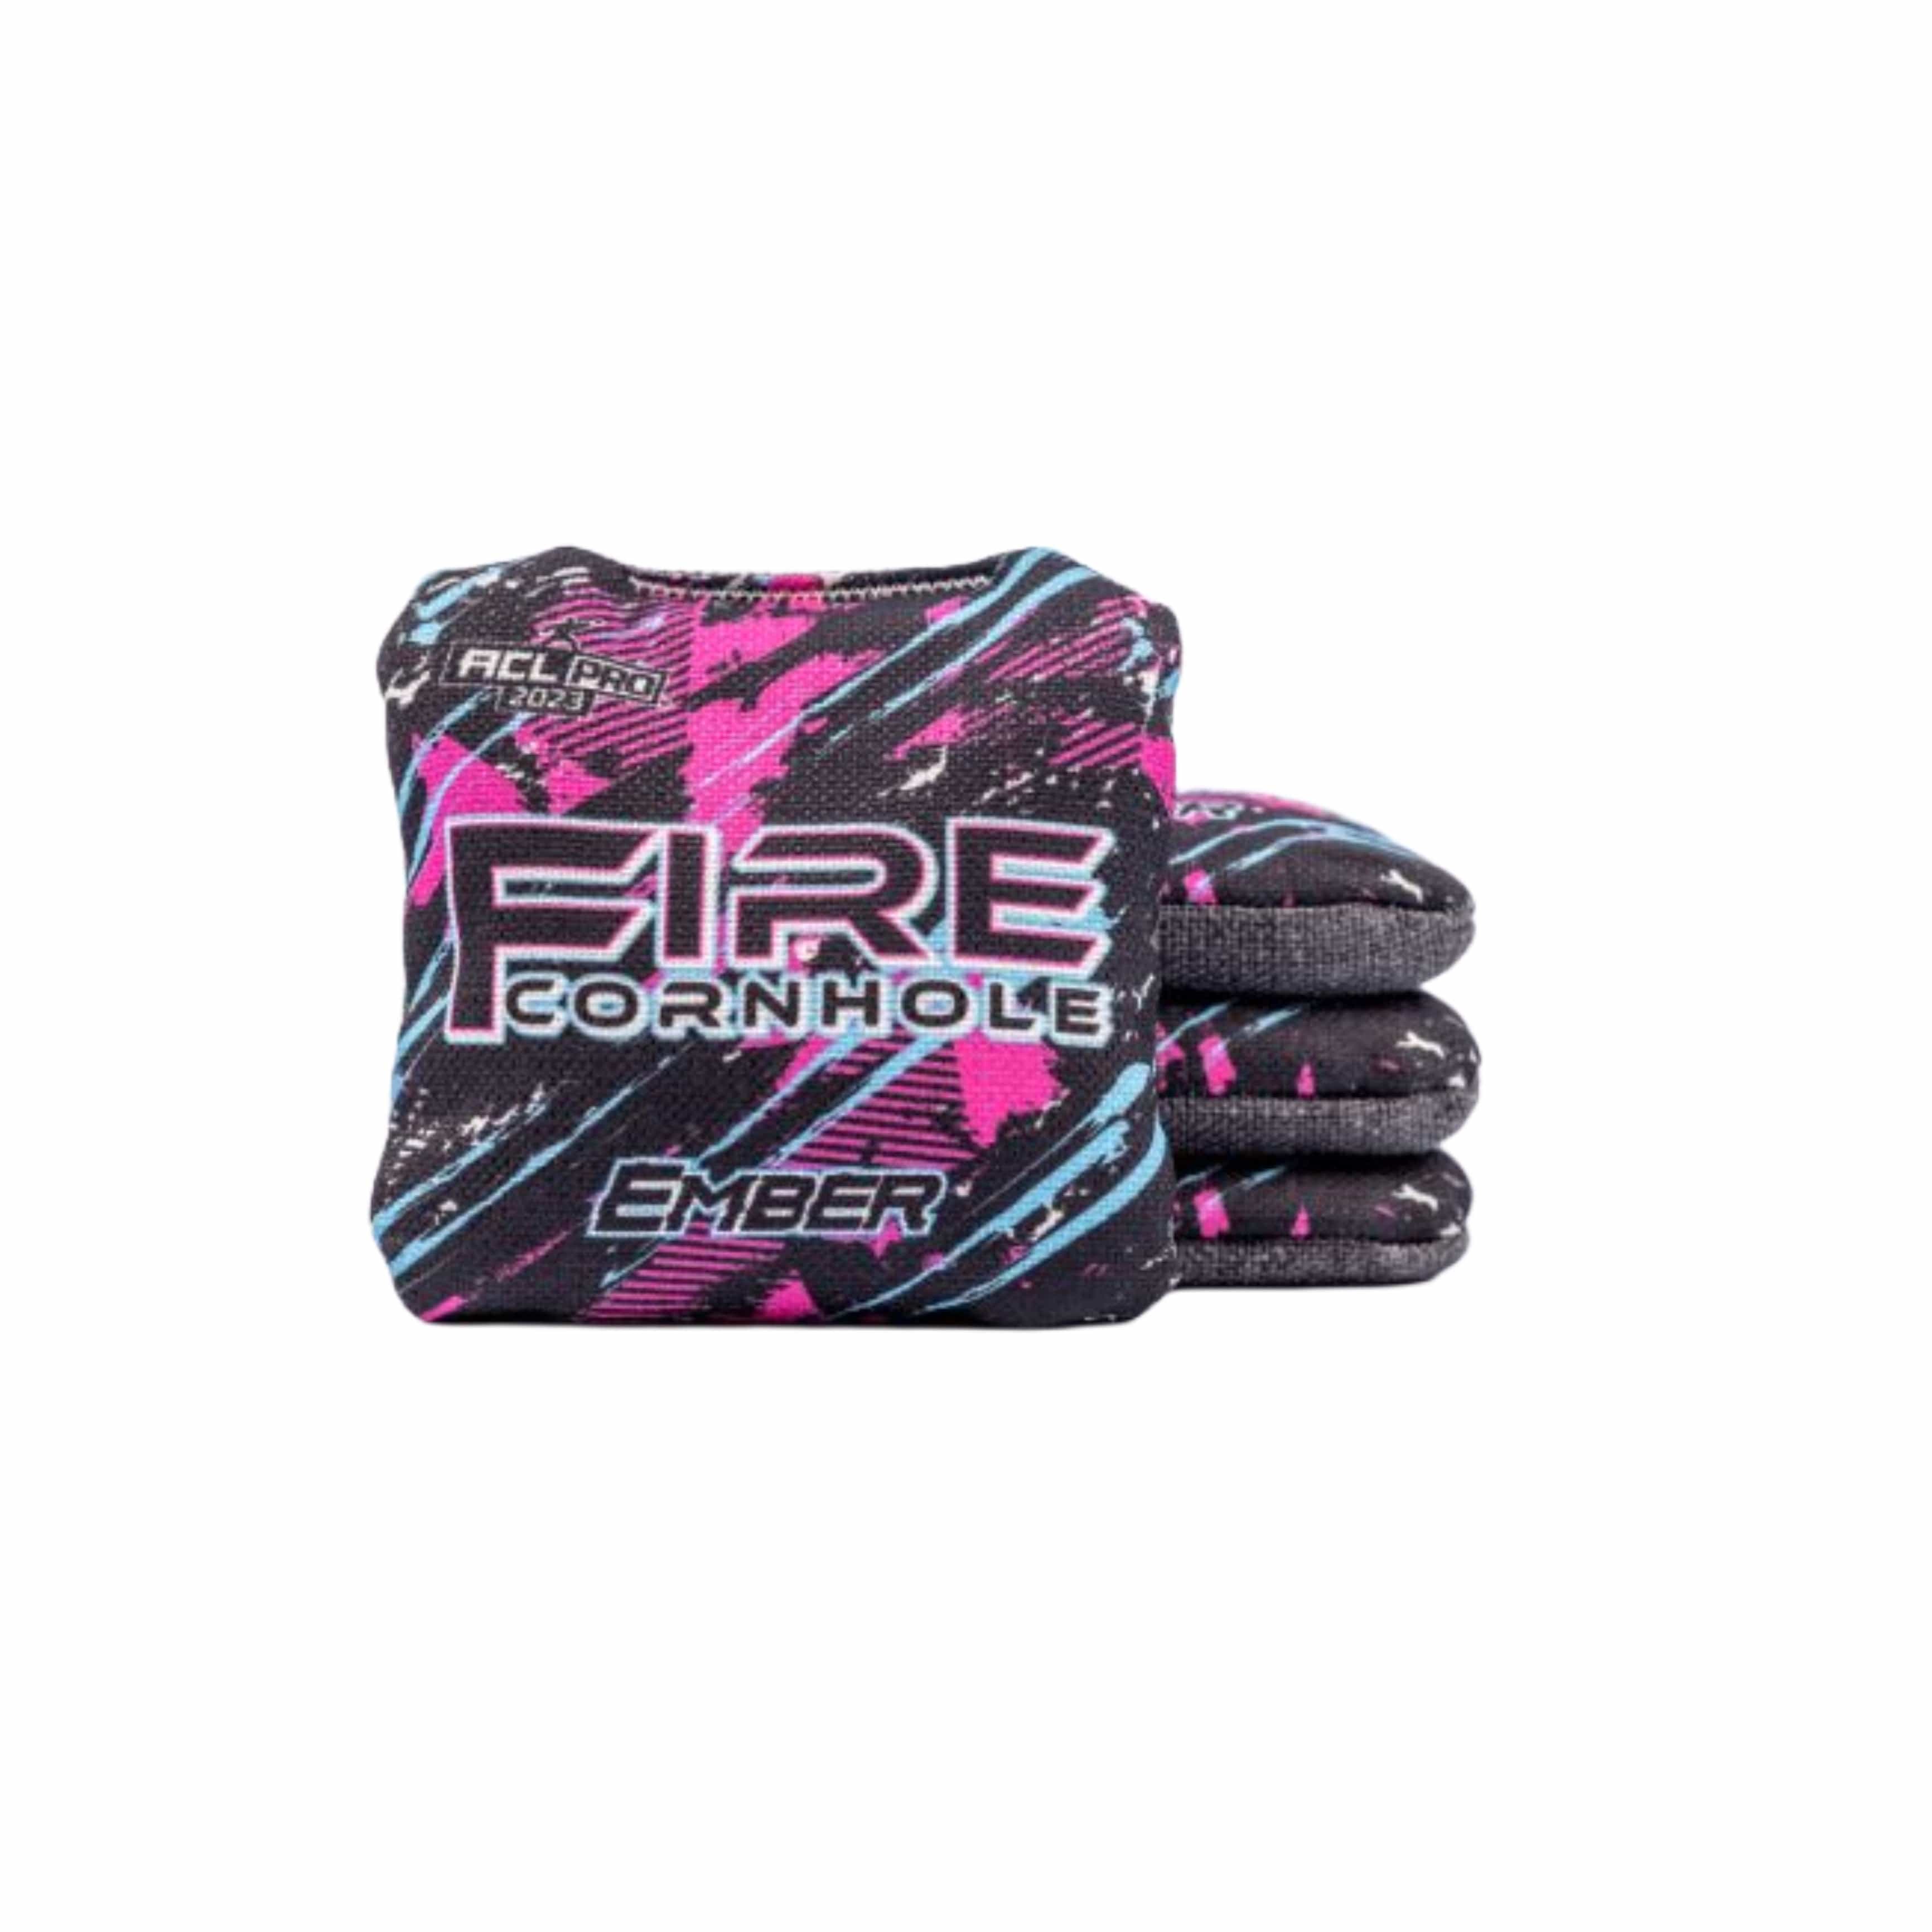 Fire Cornhole Fire Ember ACL bags in pink